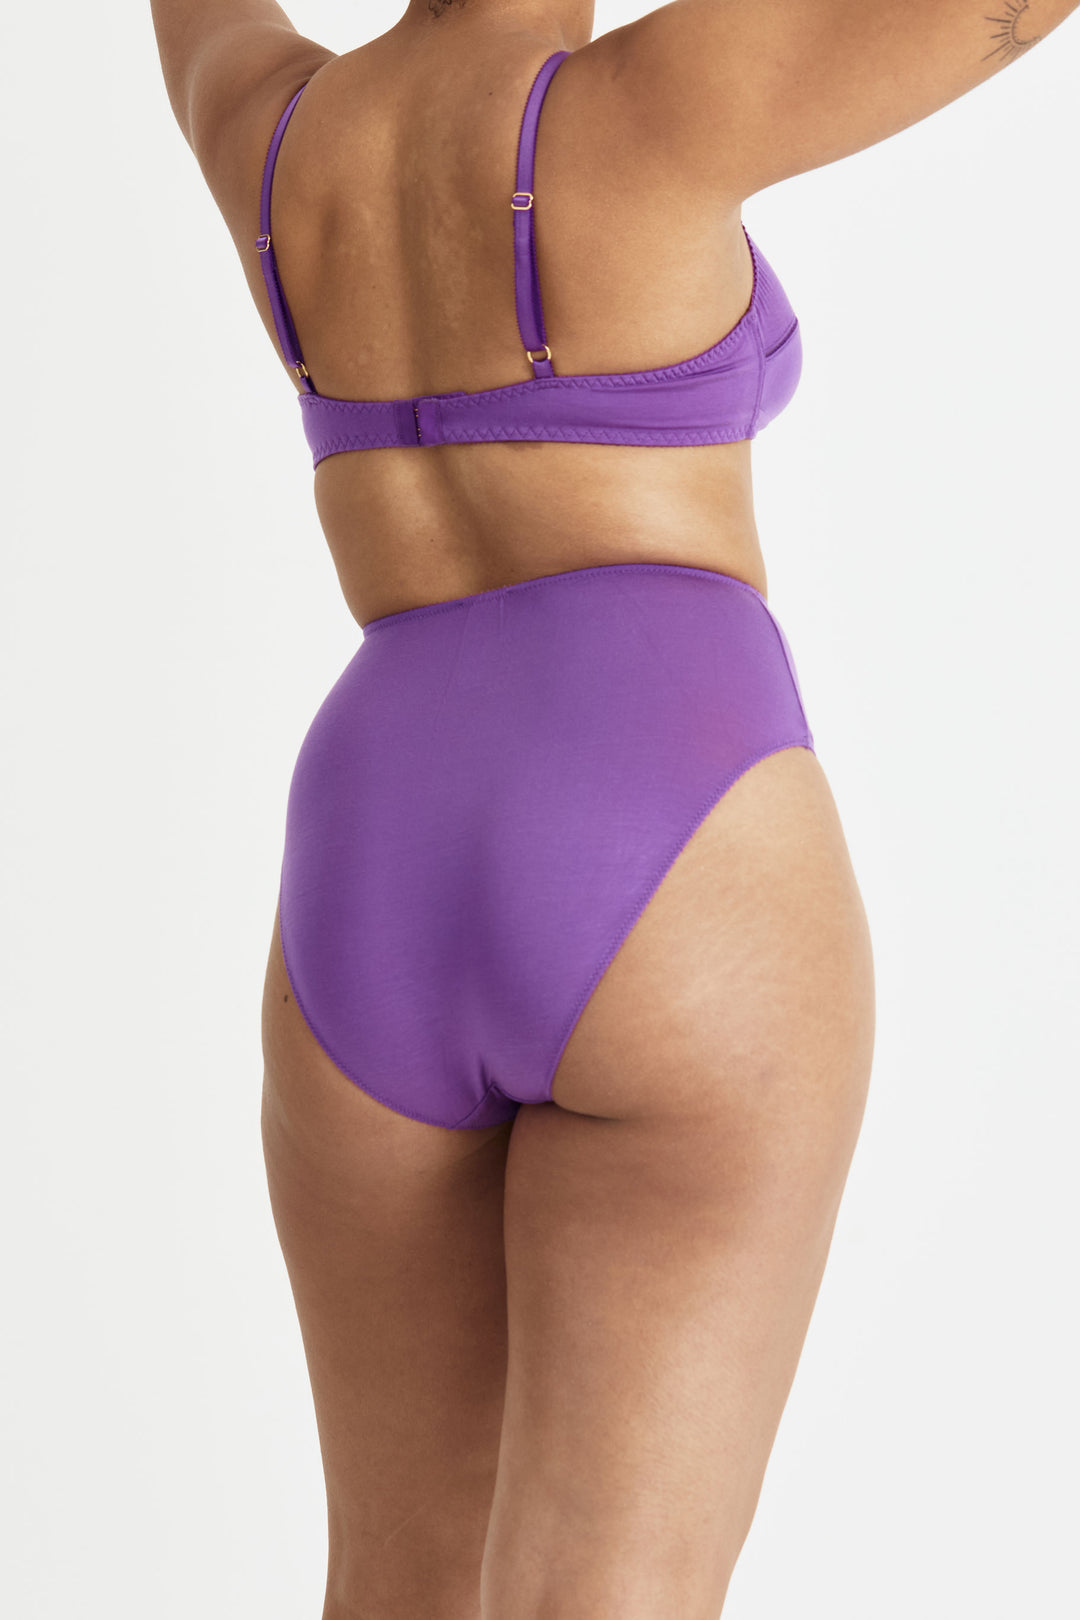 Videris Lingerie Maggie underwire free soft cup bra in purple TENCEL™ features adjustable hook and eyes at the back